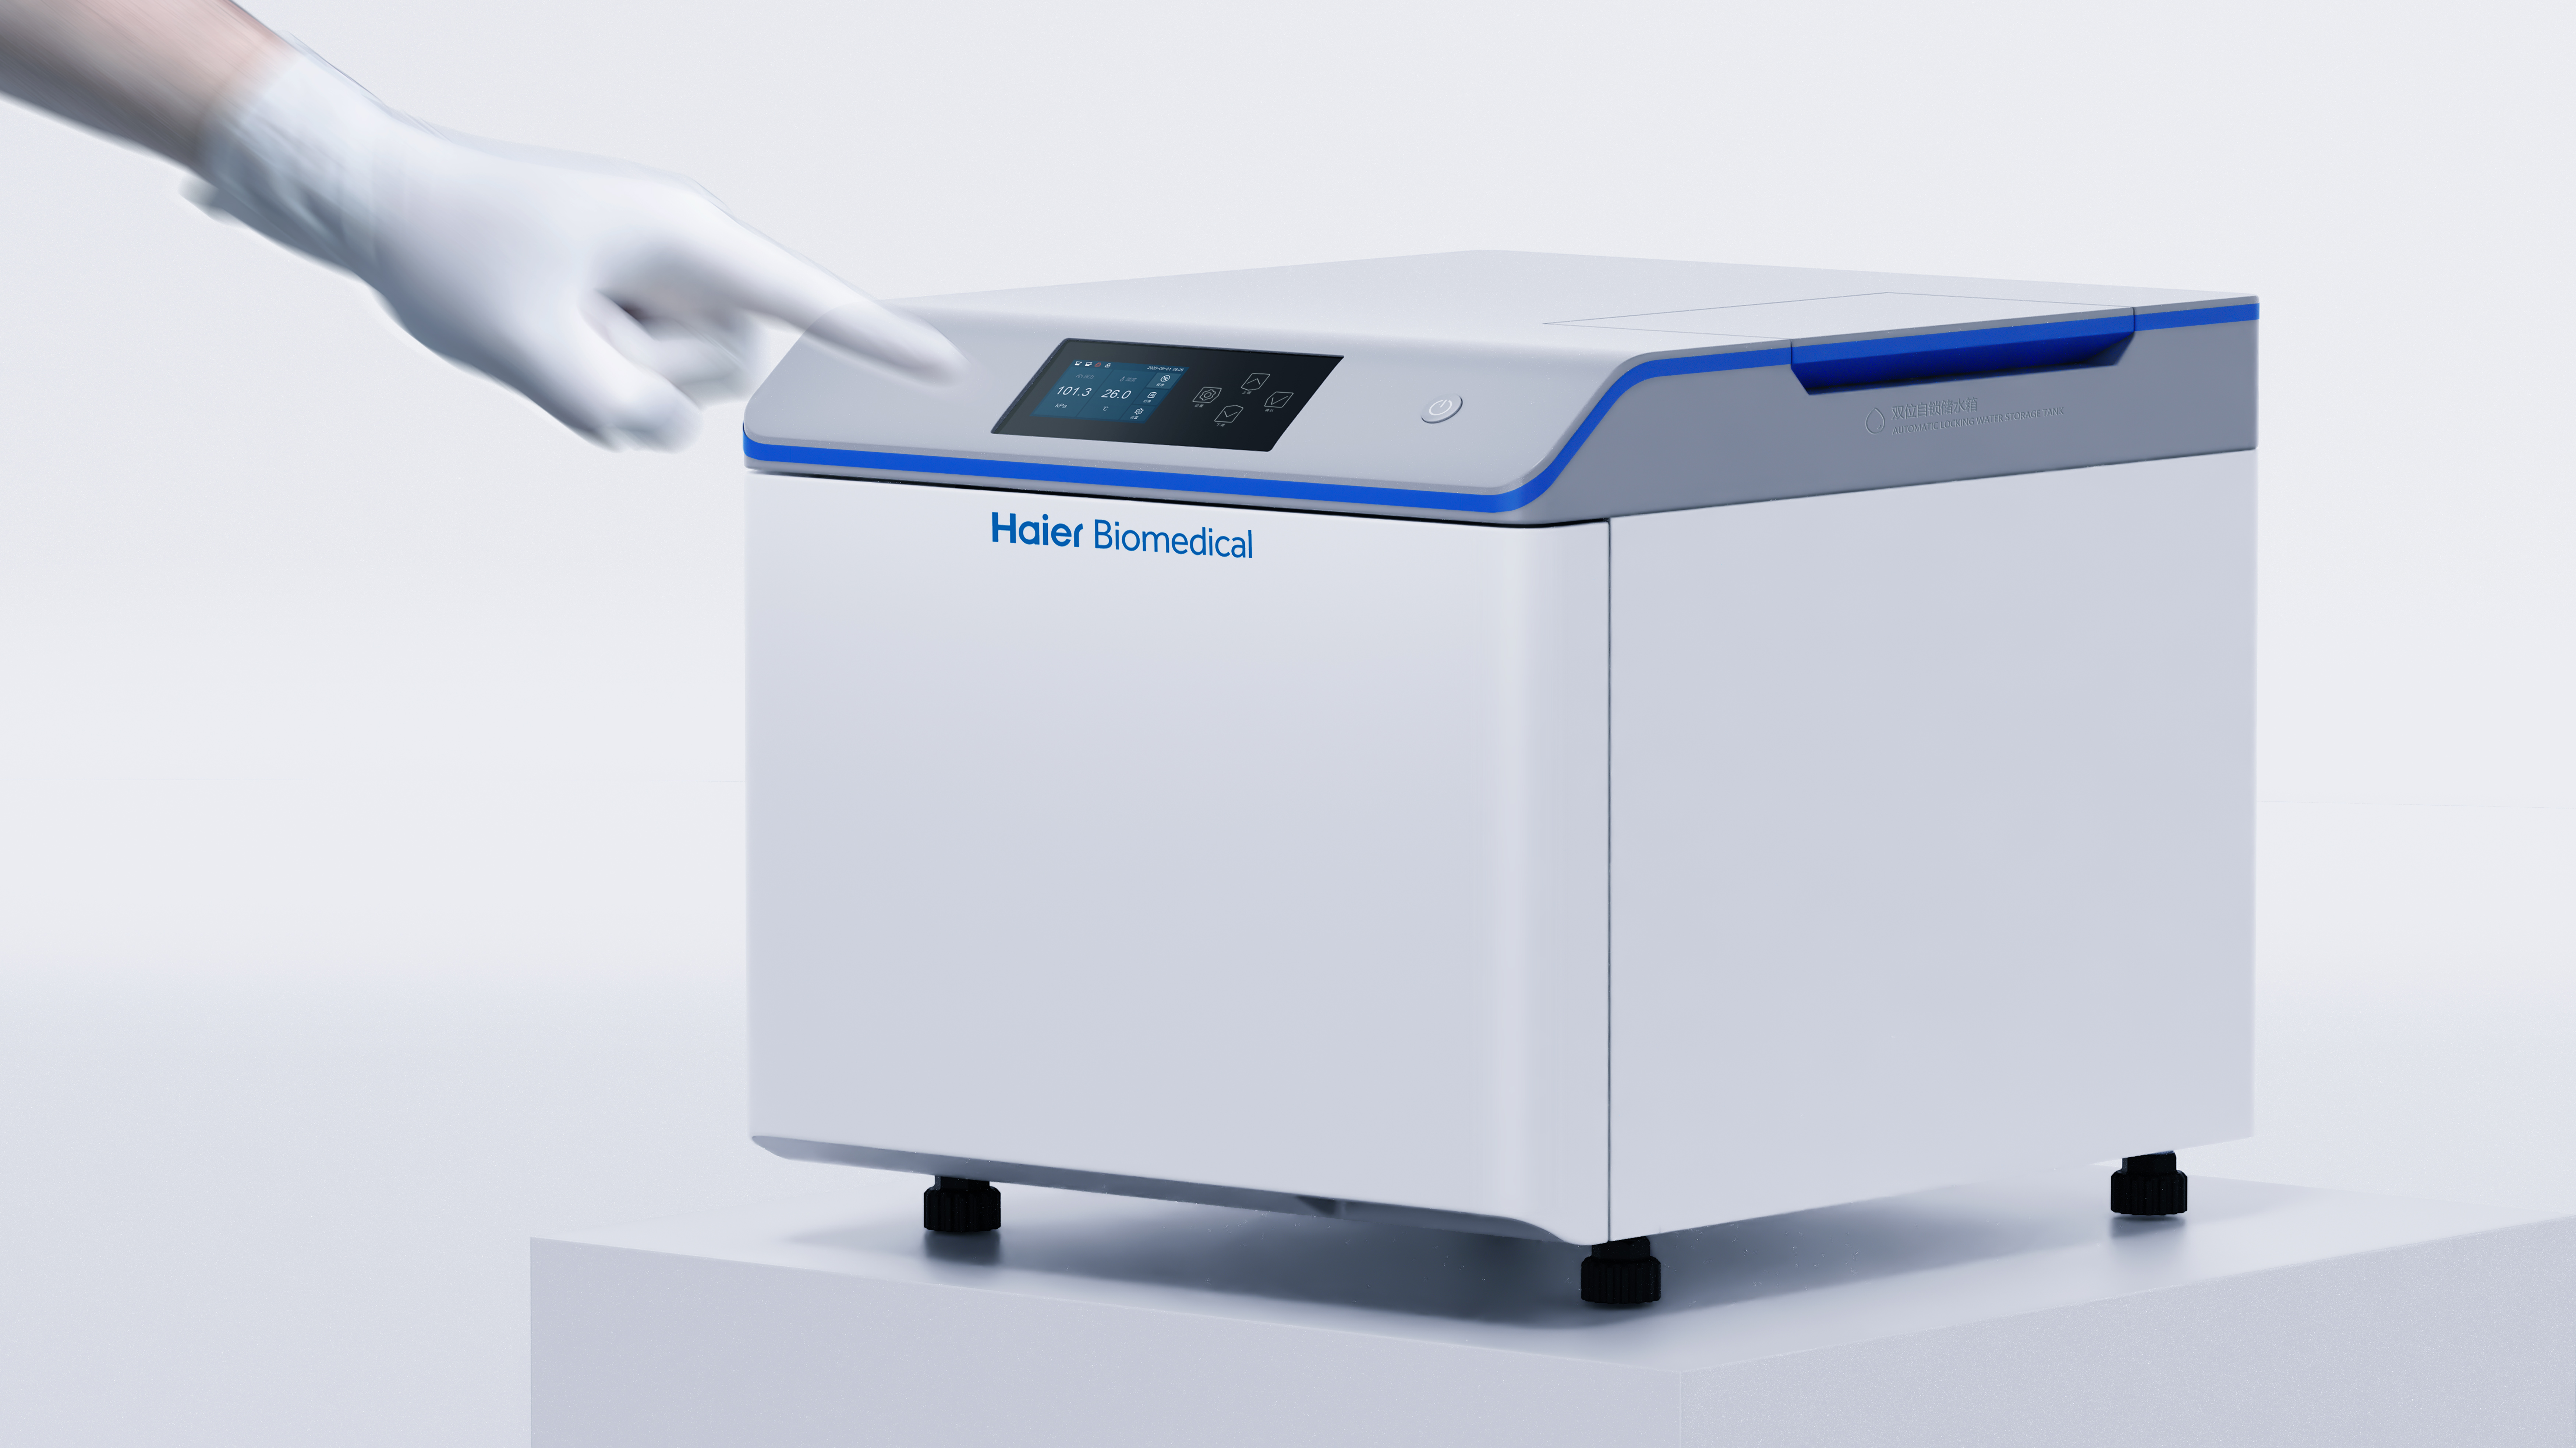 Haier Biomedical Cell Preparation Product Suite